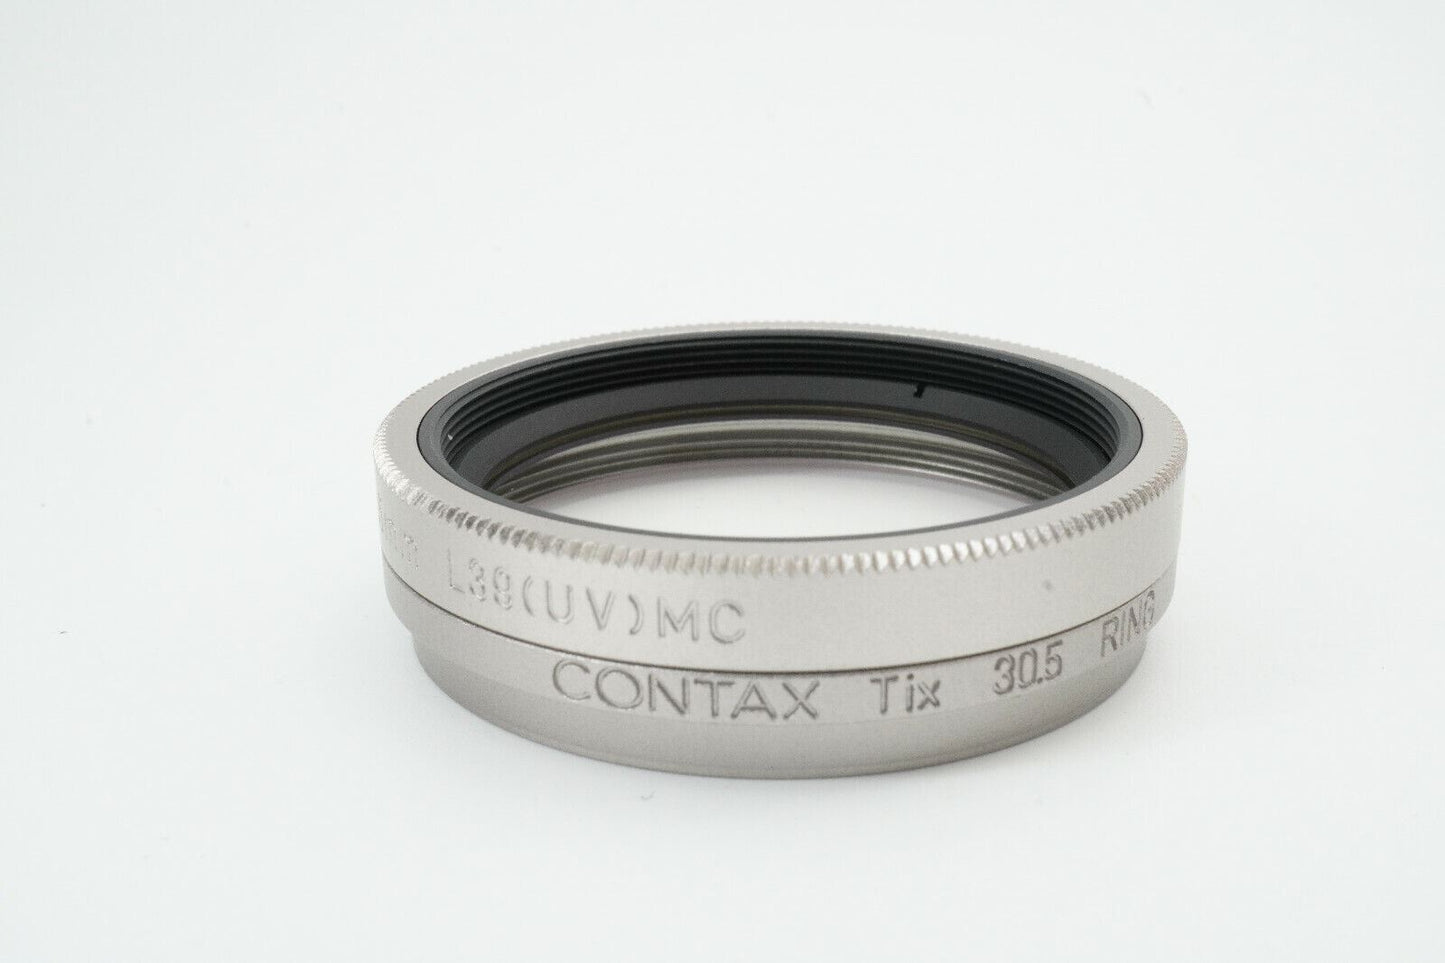 [Mint] Contax genuine 30.5mm adapter ring for Tix Compact Camera #B008